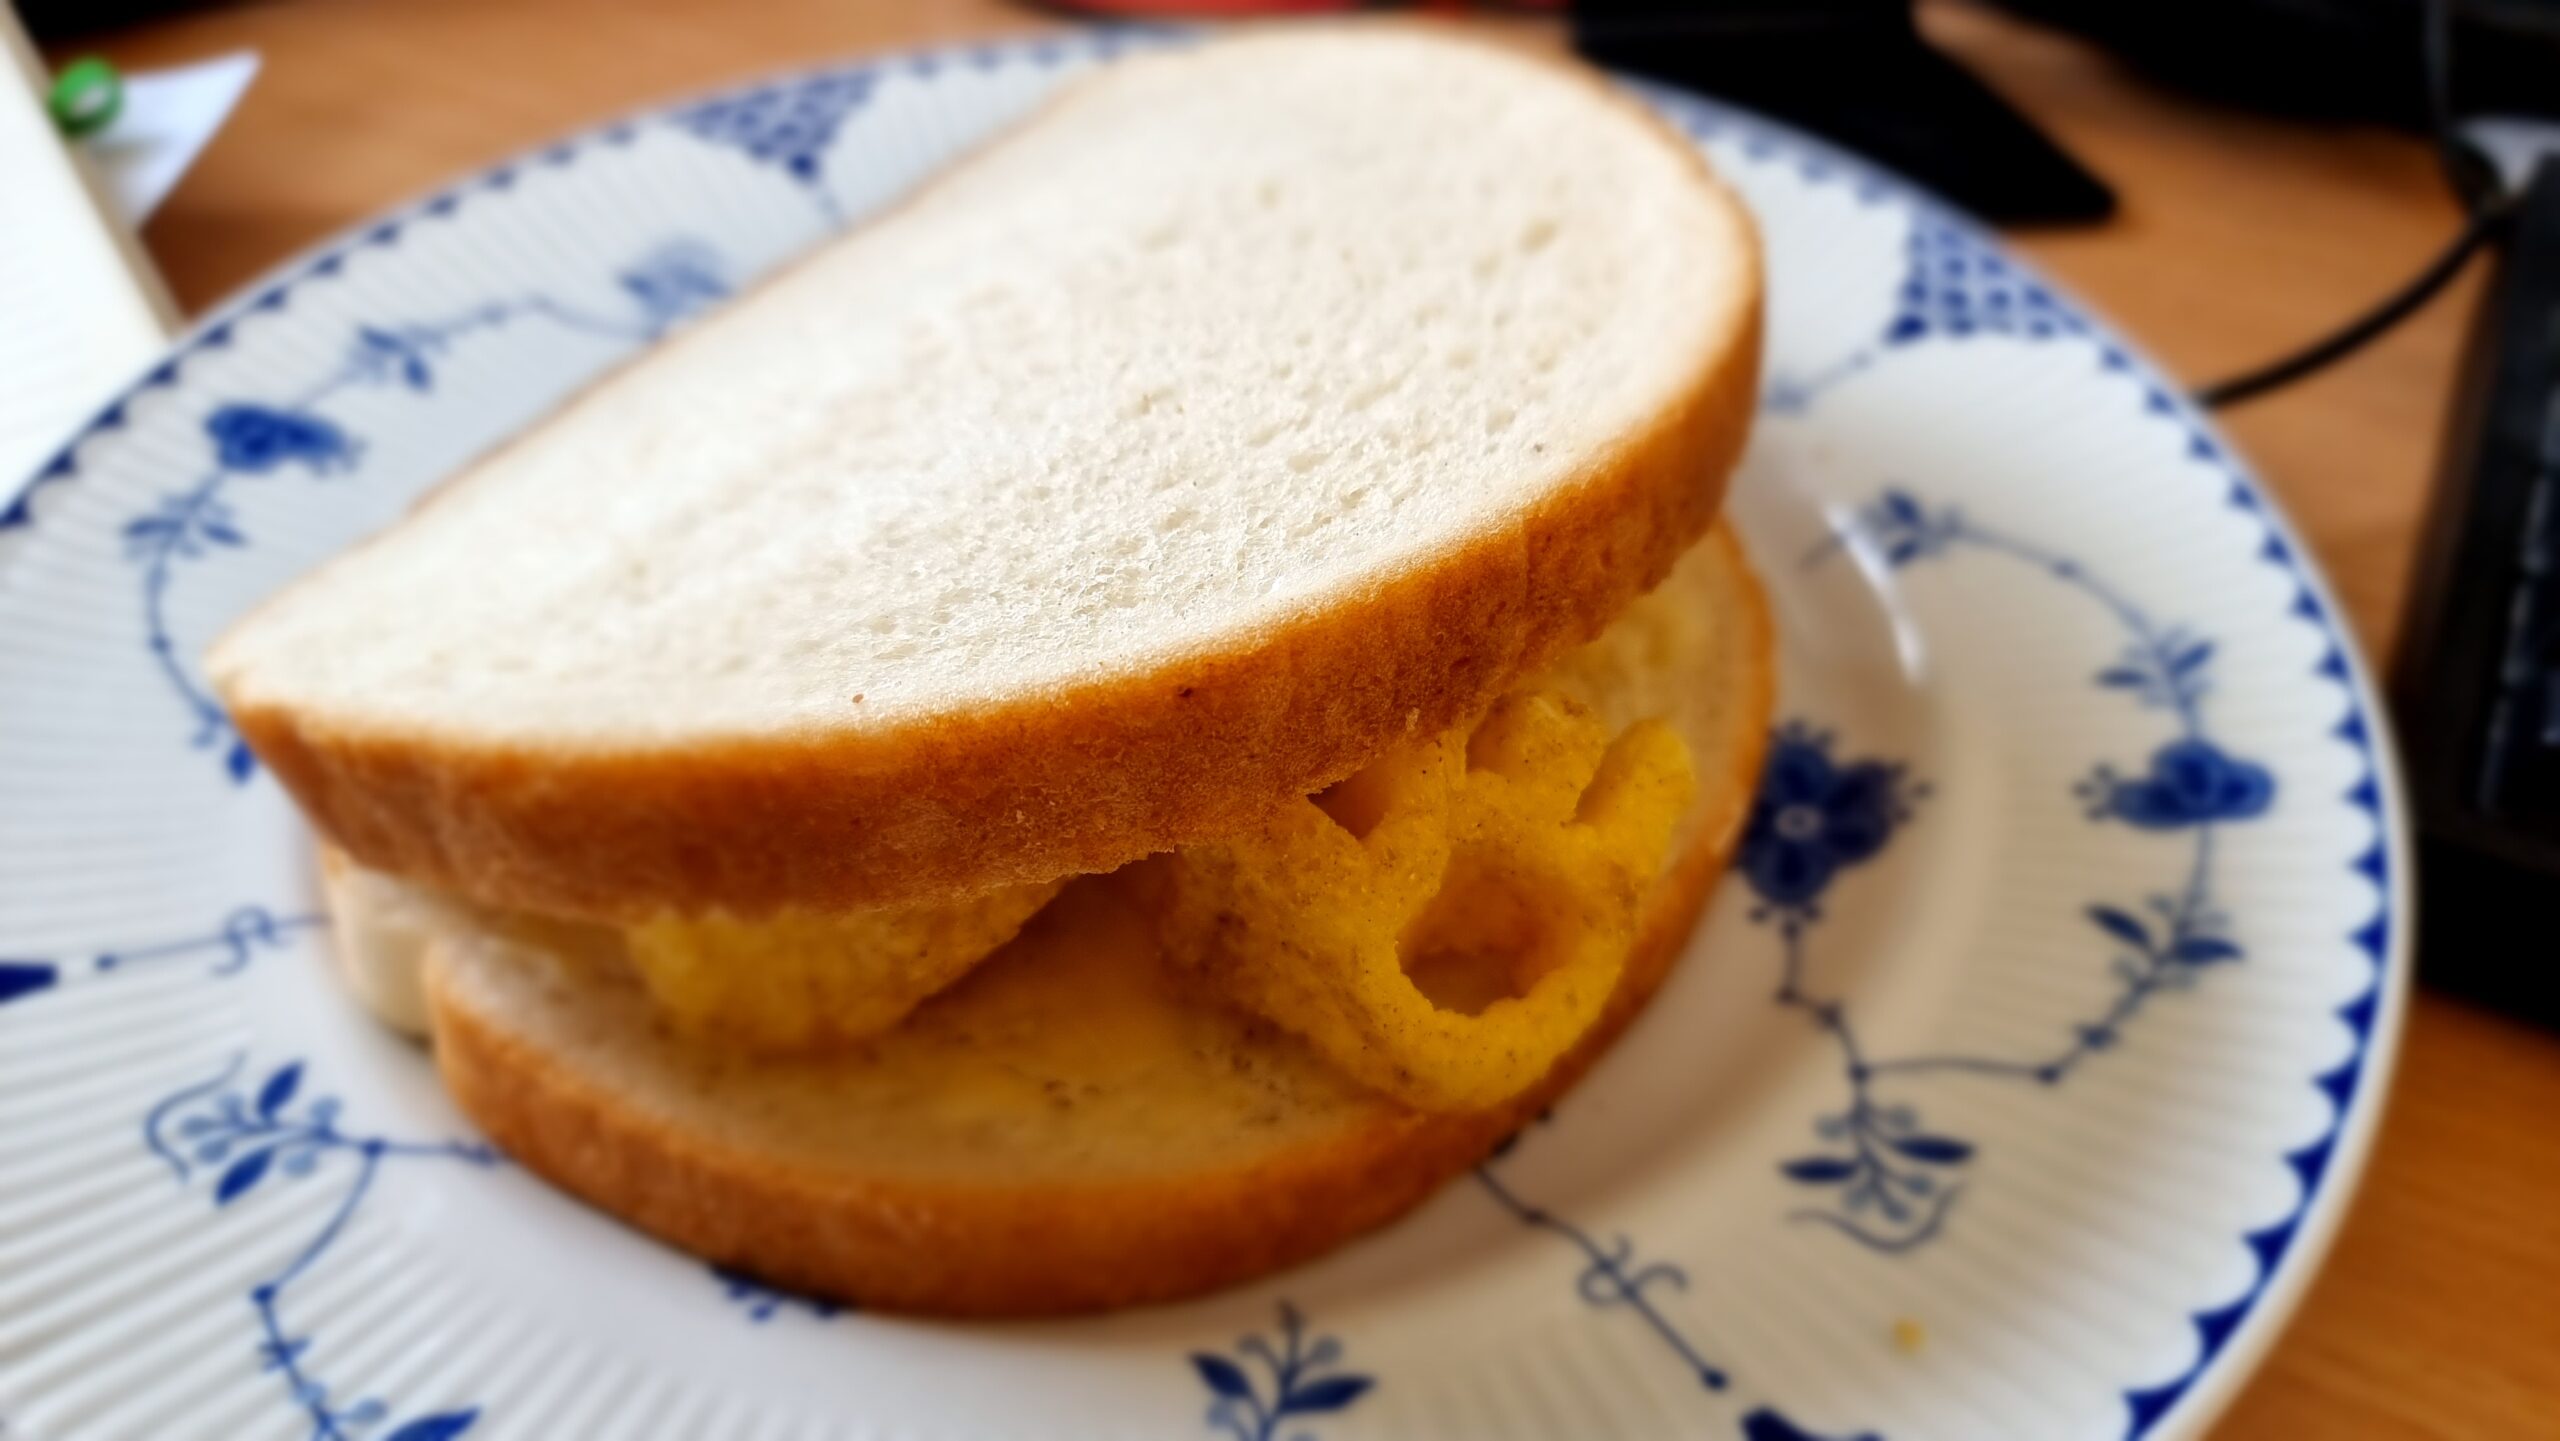 Thich white sandwich on a blue-and-white china plate, with the distinctive shape of an organge-coloured Monster Munch crisp poking out.